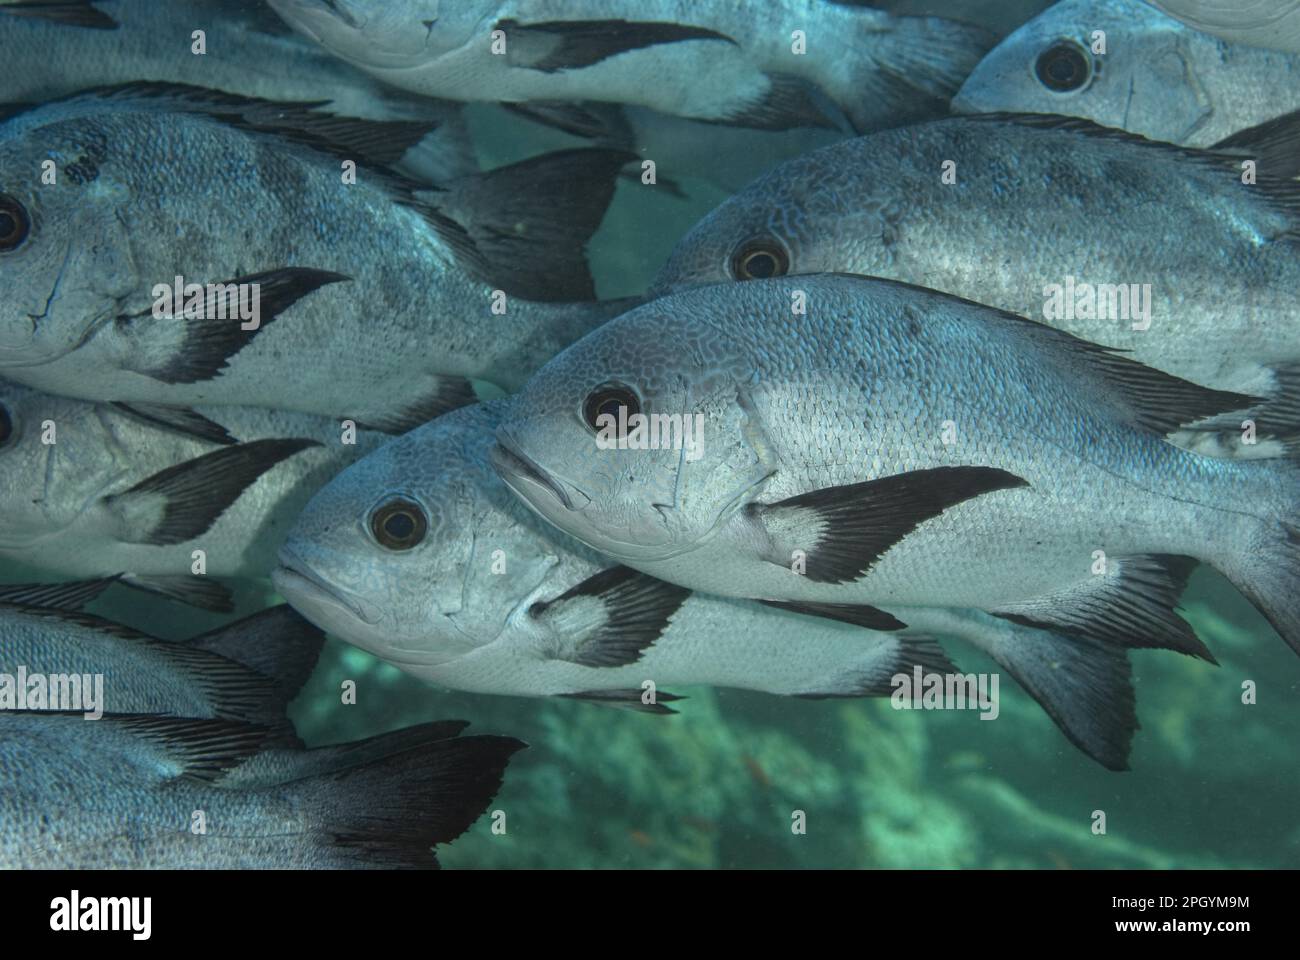 Black and white snapper (Macolor niger), Black snapper, Other animals, Fish, Perch-like, Animals, Black-and-white snapper shoal, Sipadan Island Stock Photo